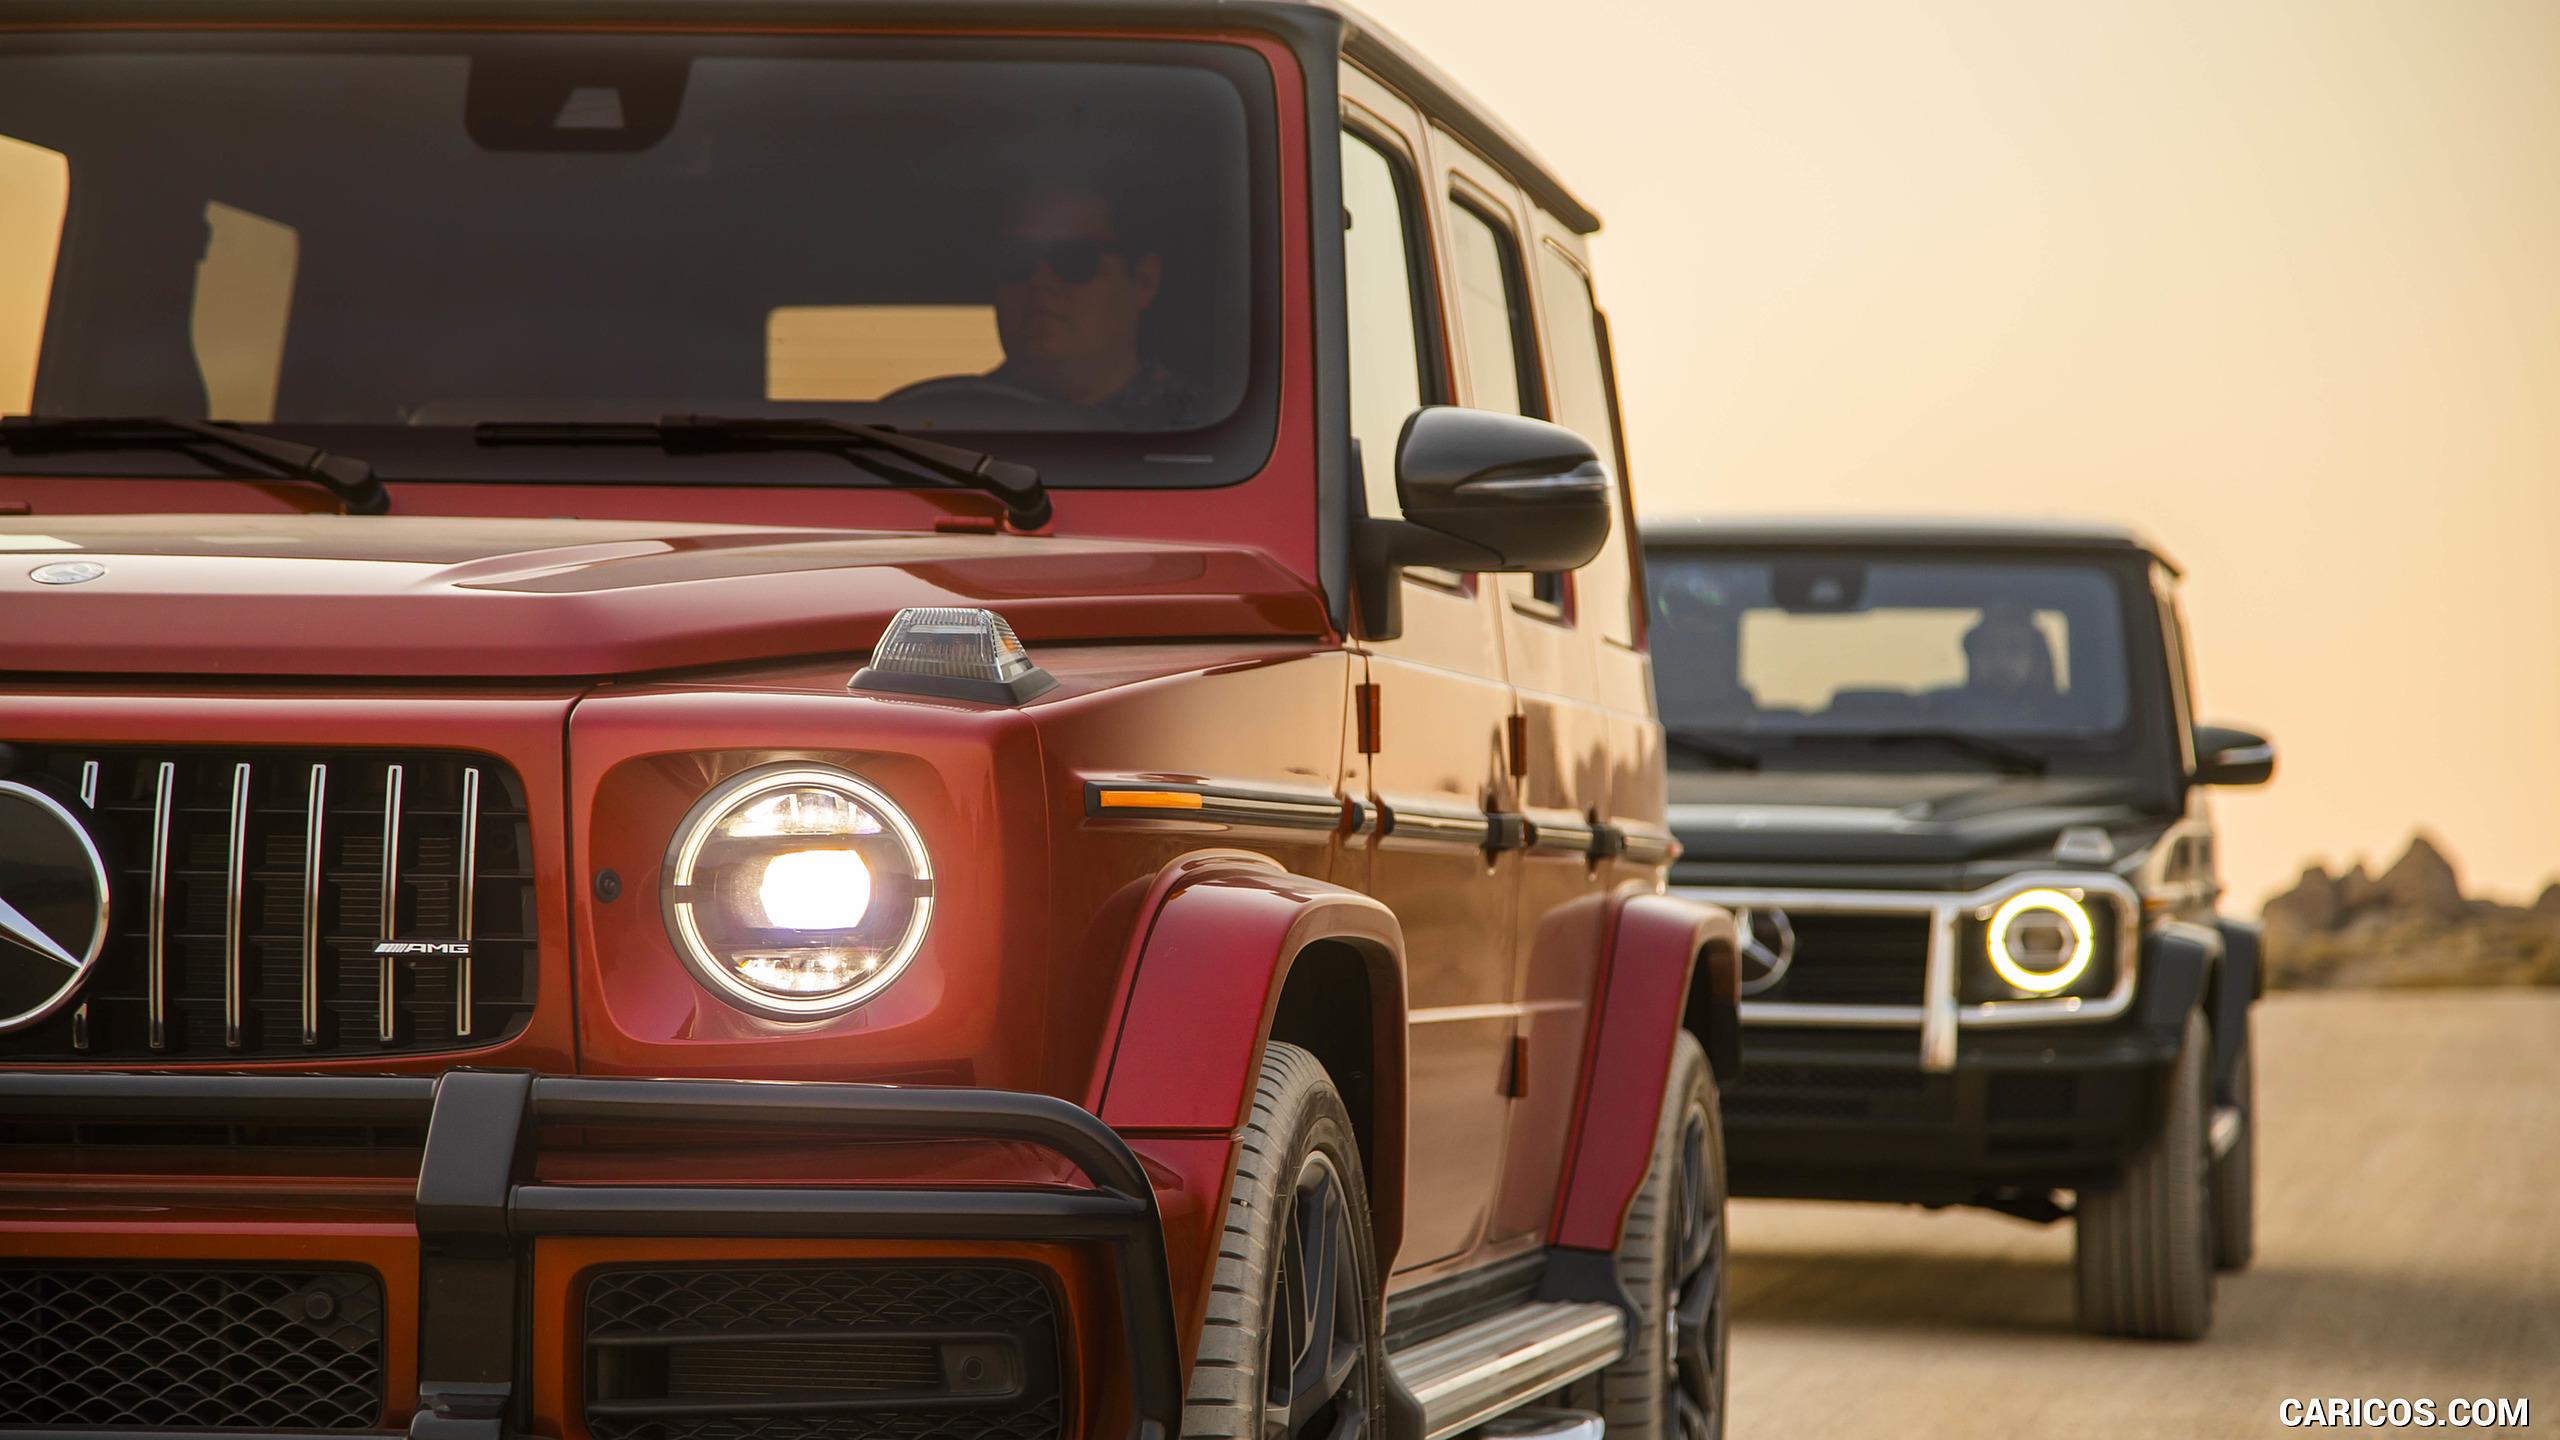 2019 Mercedes-AMG G63 (U.S.-Spec) and 2019 G550, #352 of 452